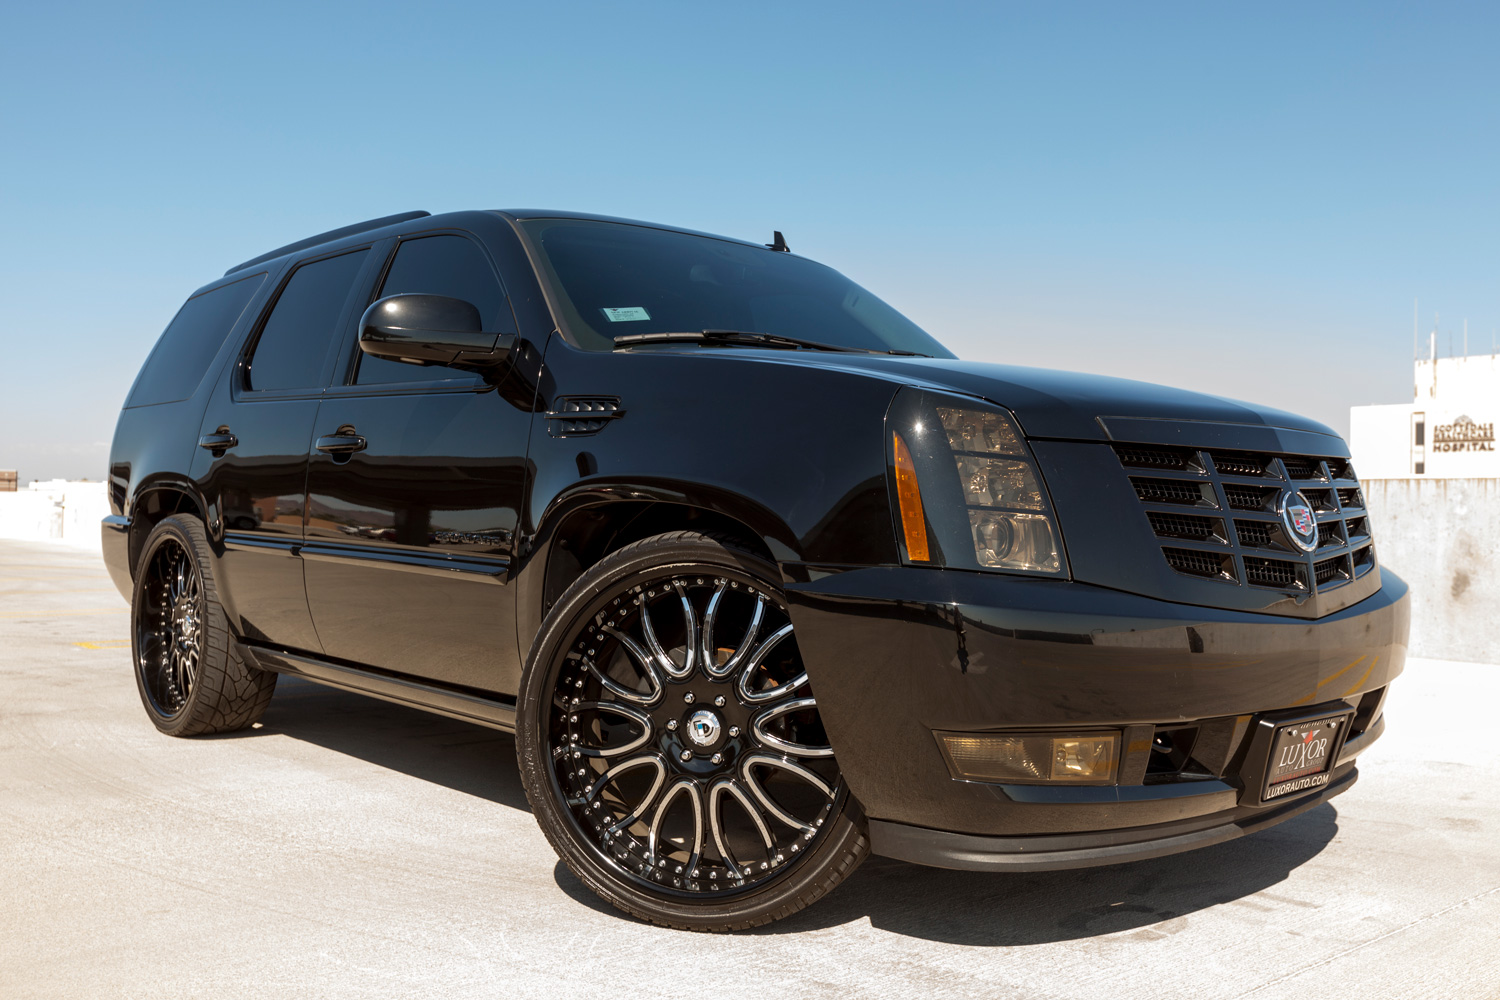 A photo of a black parked Cadillac Escalade, the Escalade from Cadillac is their most popular SUV.